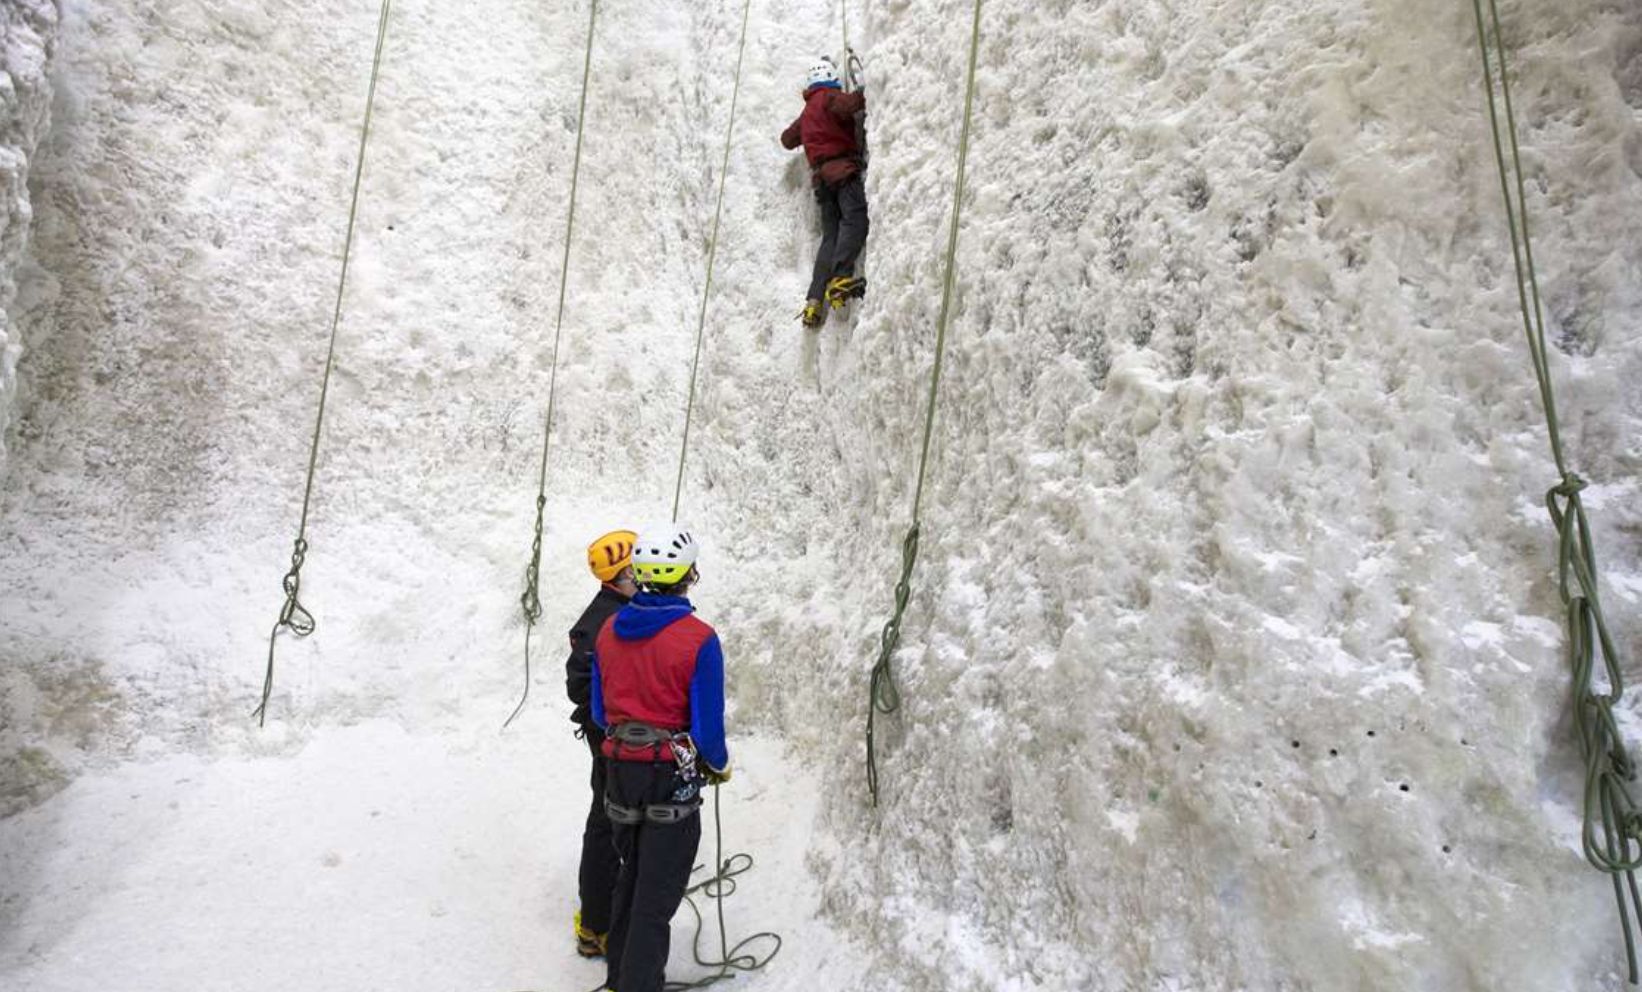 Climbers learning how to ice climb at the Ice Climbing Centre in Kinlochleven, Scotland